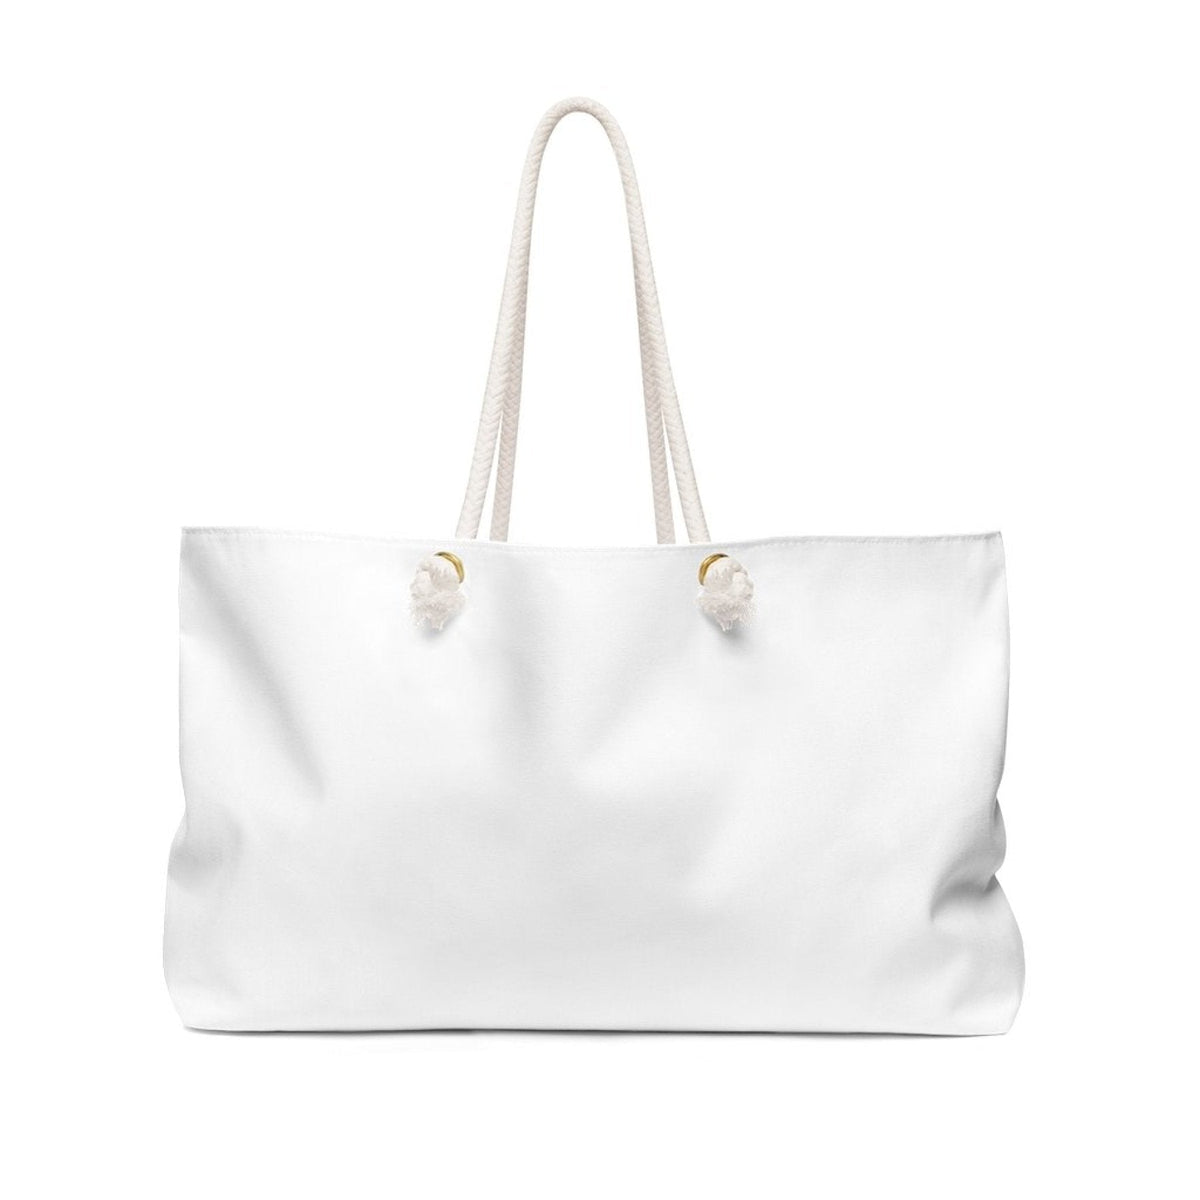 Weekender Tote Bag,  White by inQue.Style